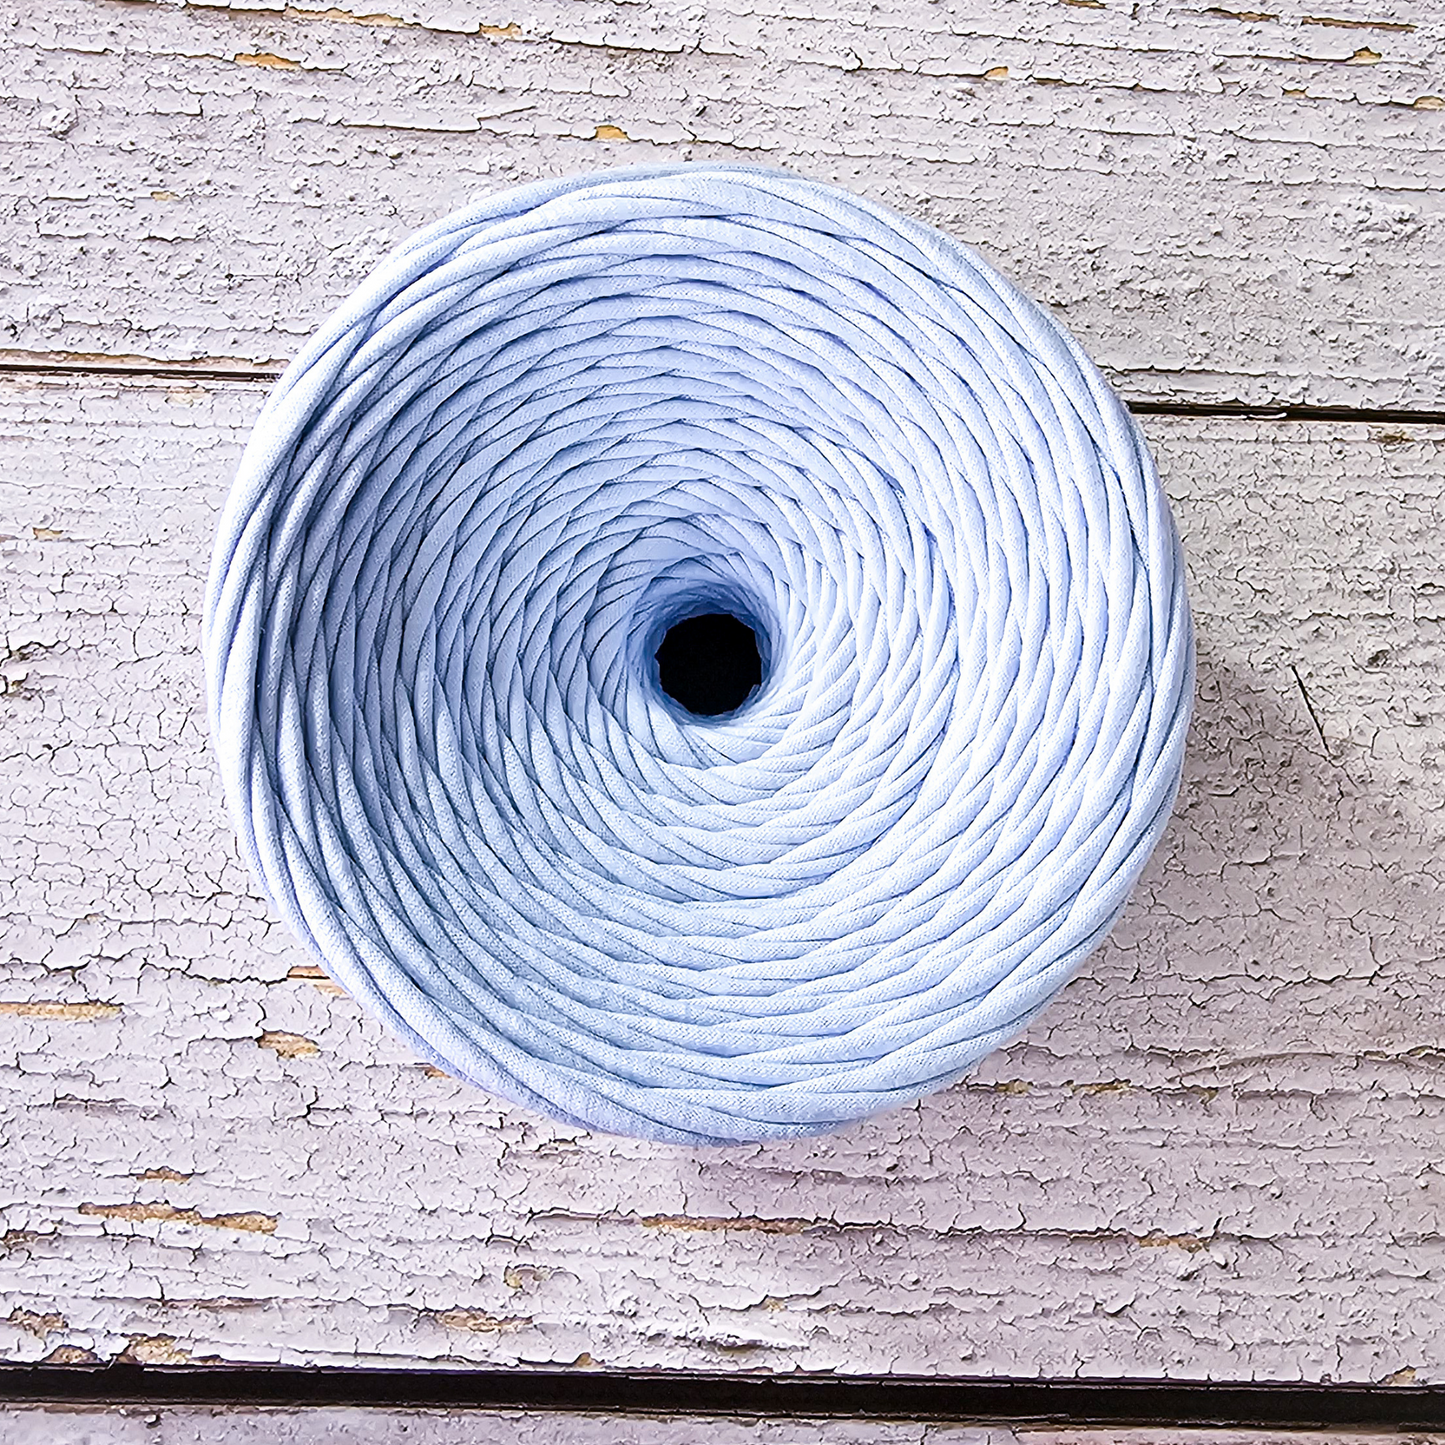 T-shirt yarn for crocheting baskets, bags, rugs and home decor. Sky blue